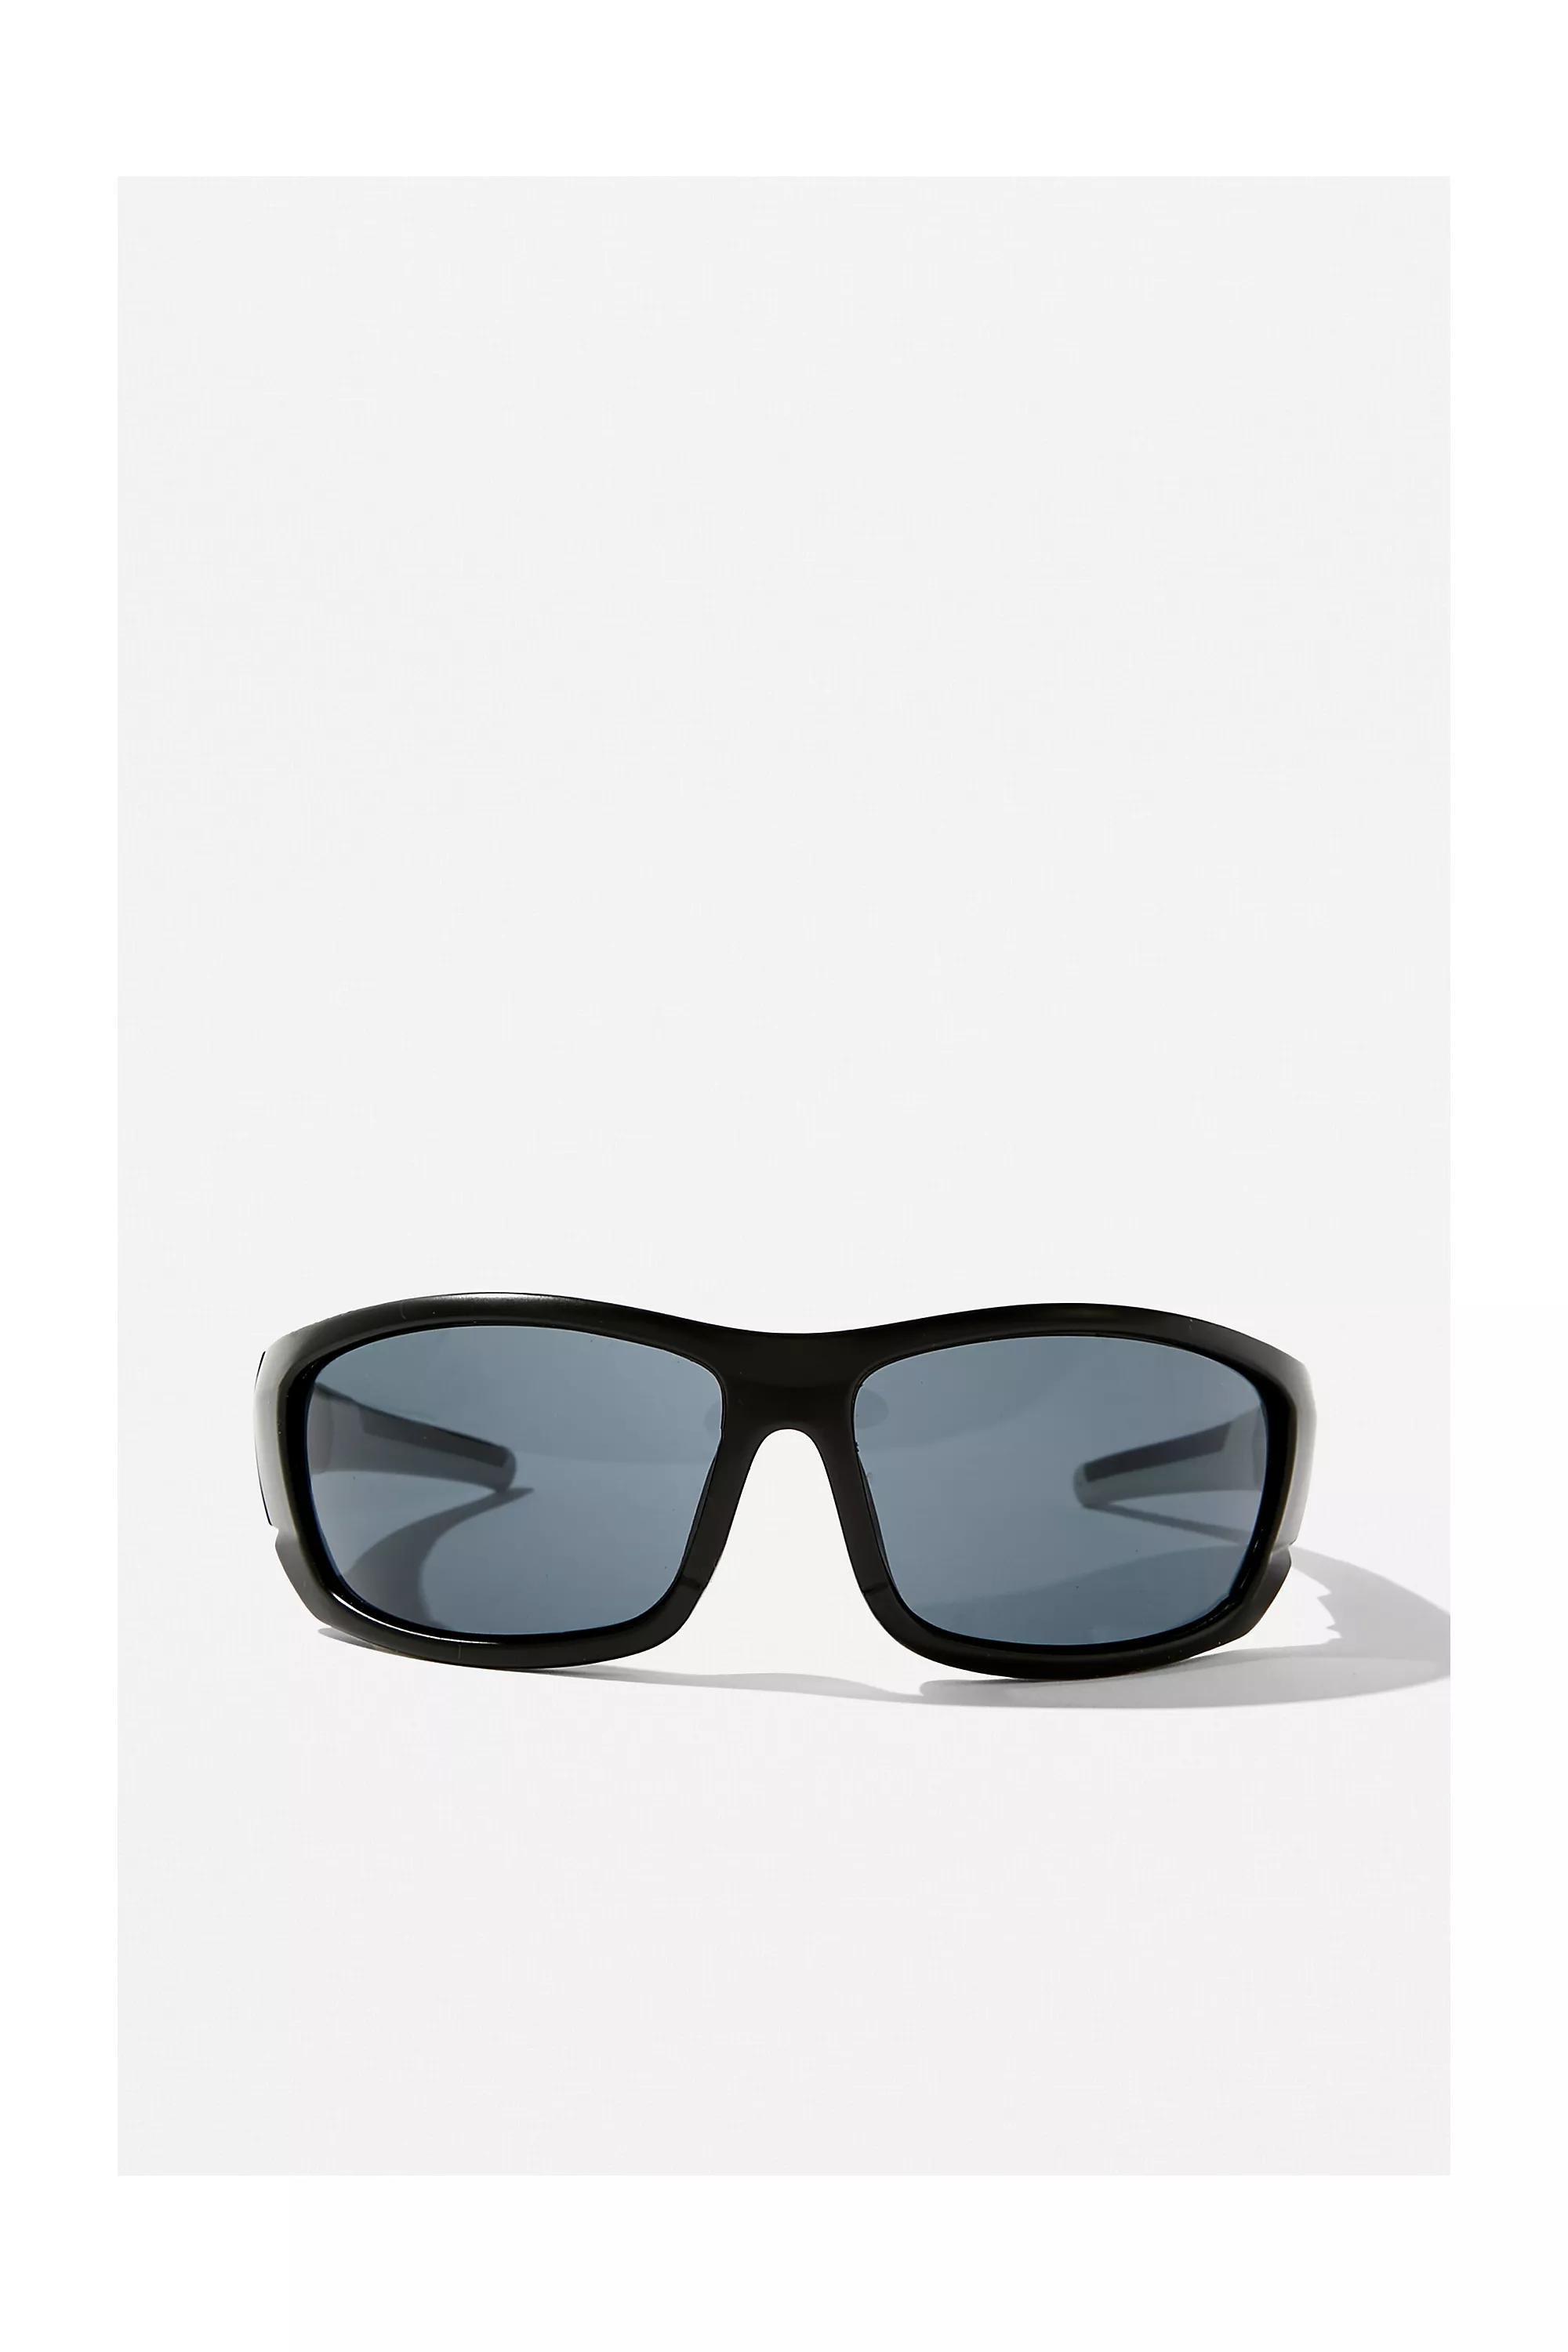 Urban Outfitters - Black Iets Leni